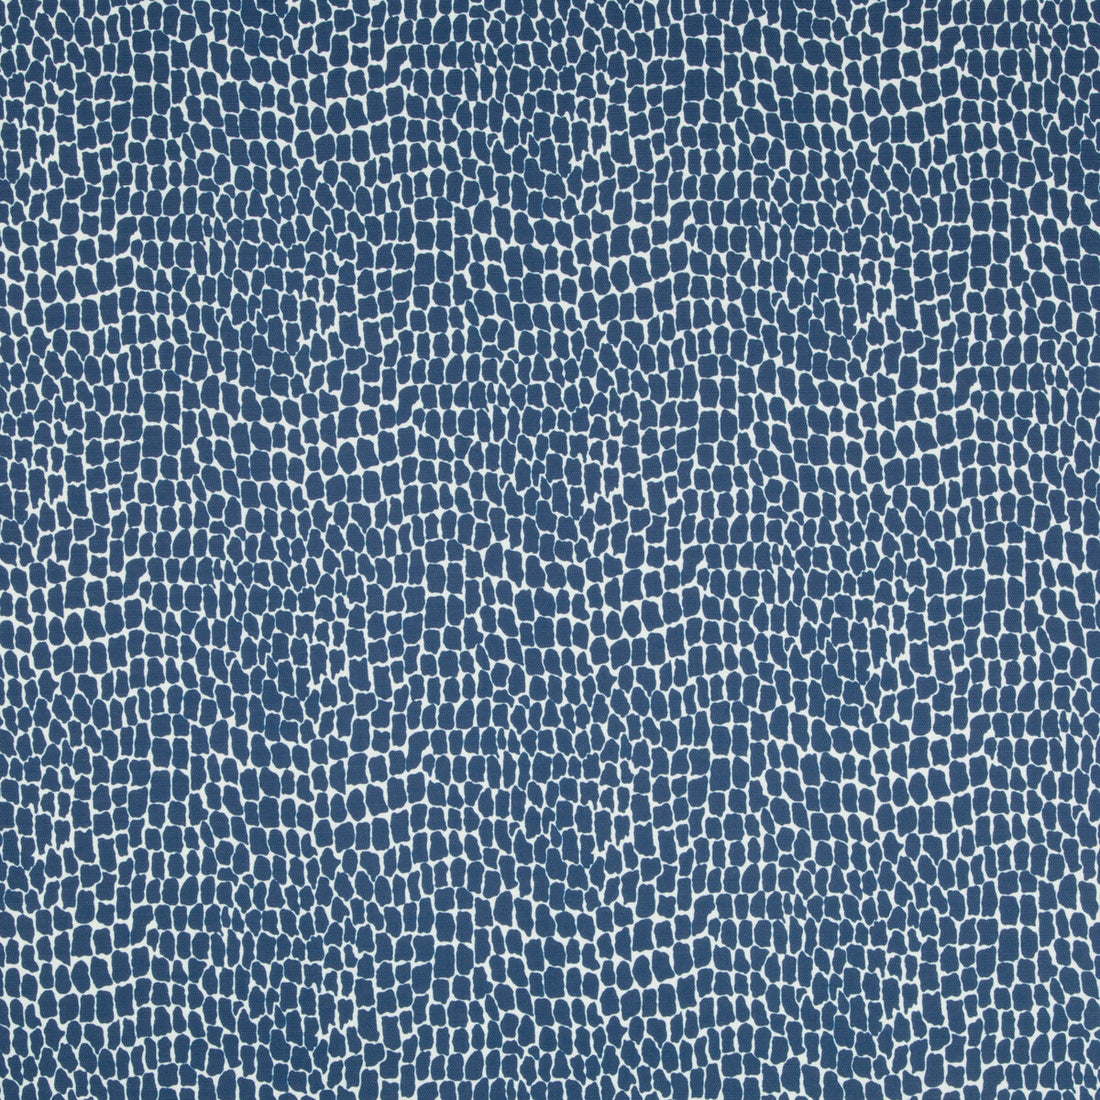 Nile Print fabric in marine color - pattern 8017154.50.0 - by Brunschwig &amp; Fils in the En Vacances collection